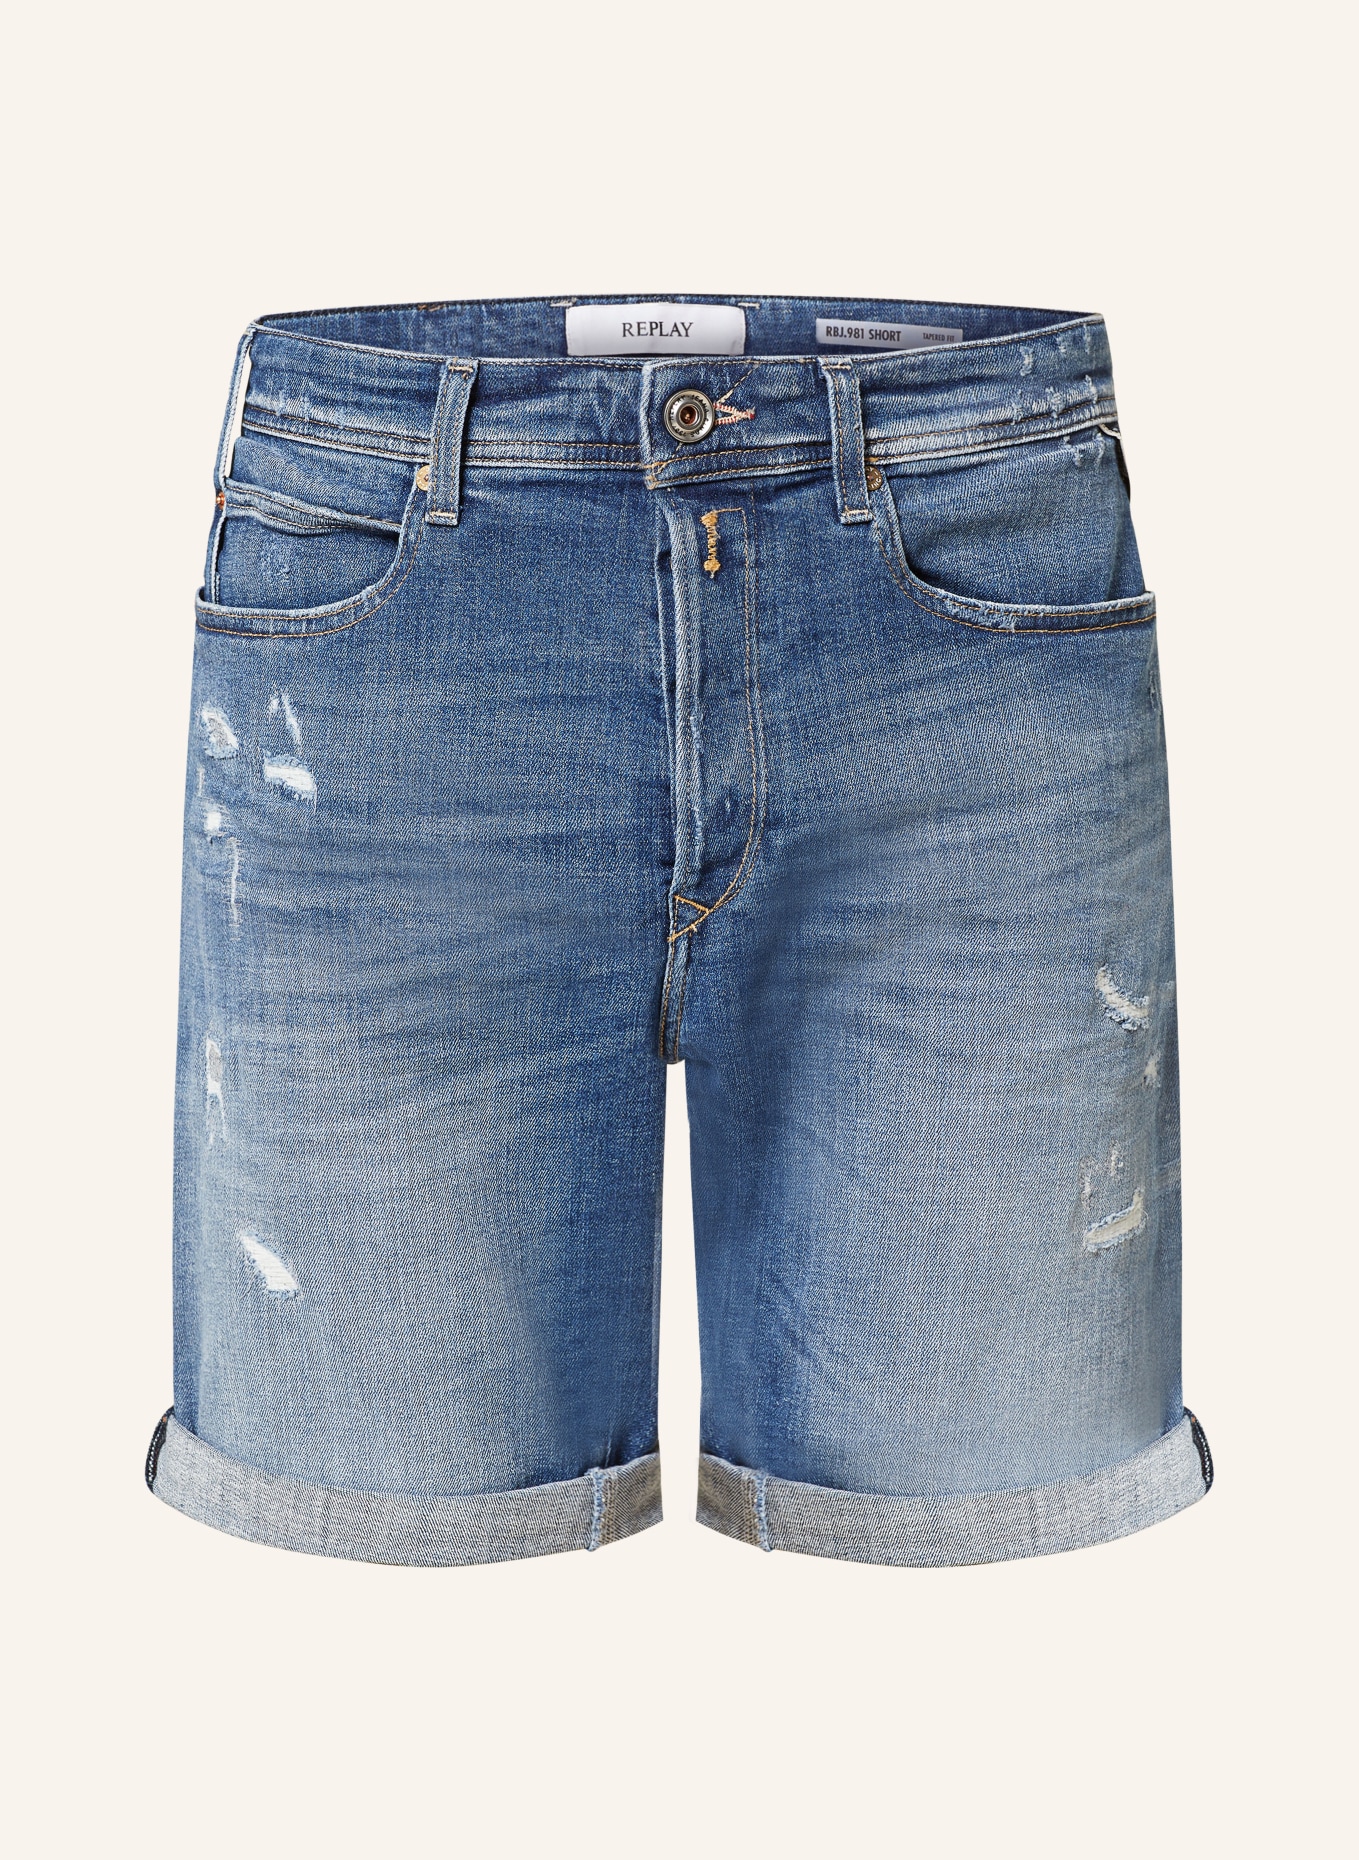 REPLAY Denim shorts tapered fit, Color: 009 MEDIUM BLUE (Image 1)